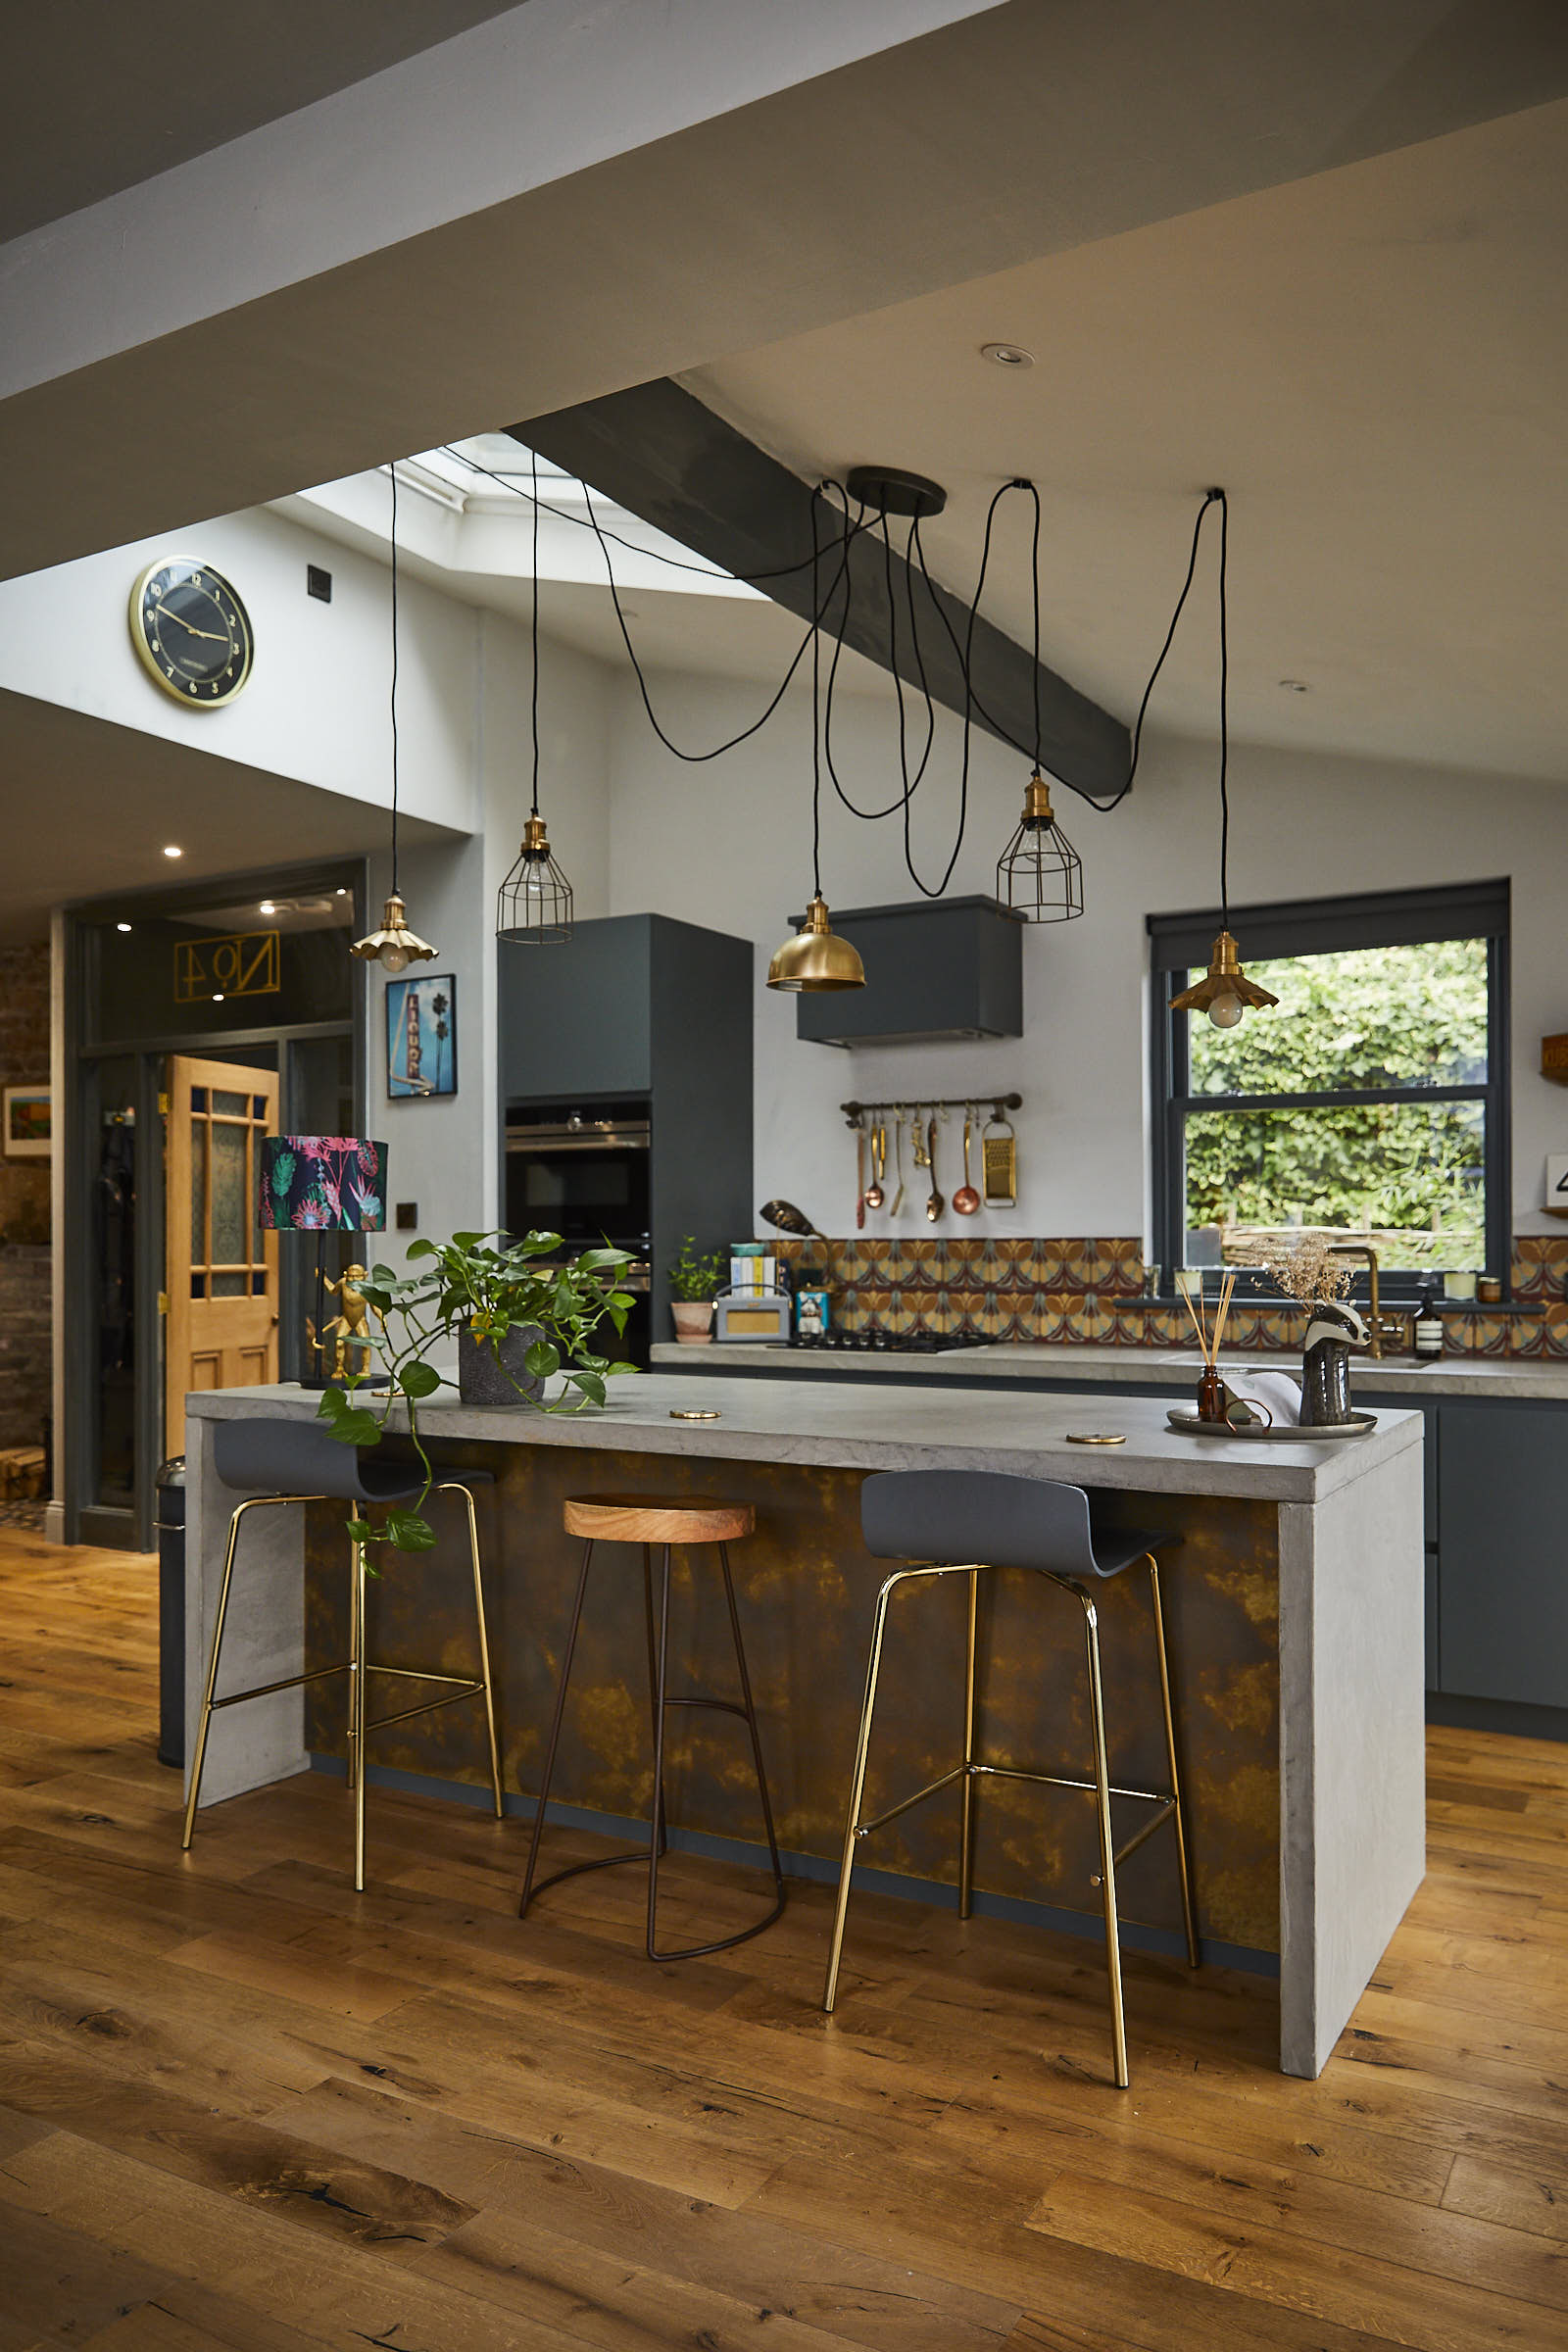 Bar stools sit under kitchen island with concrete waterfall worktop and clean oak flooring